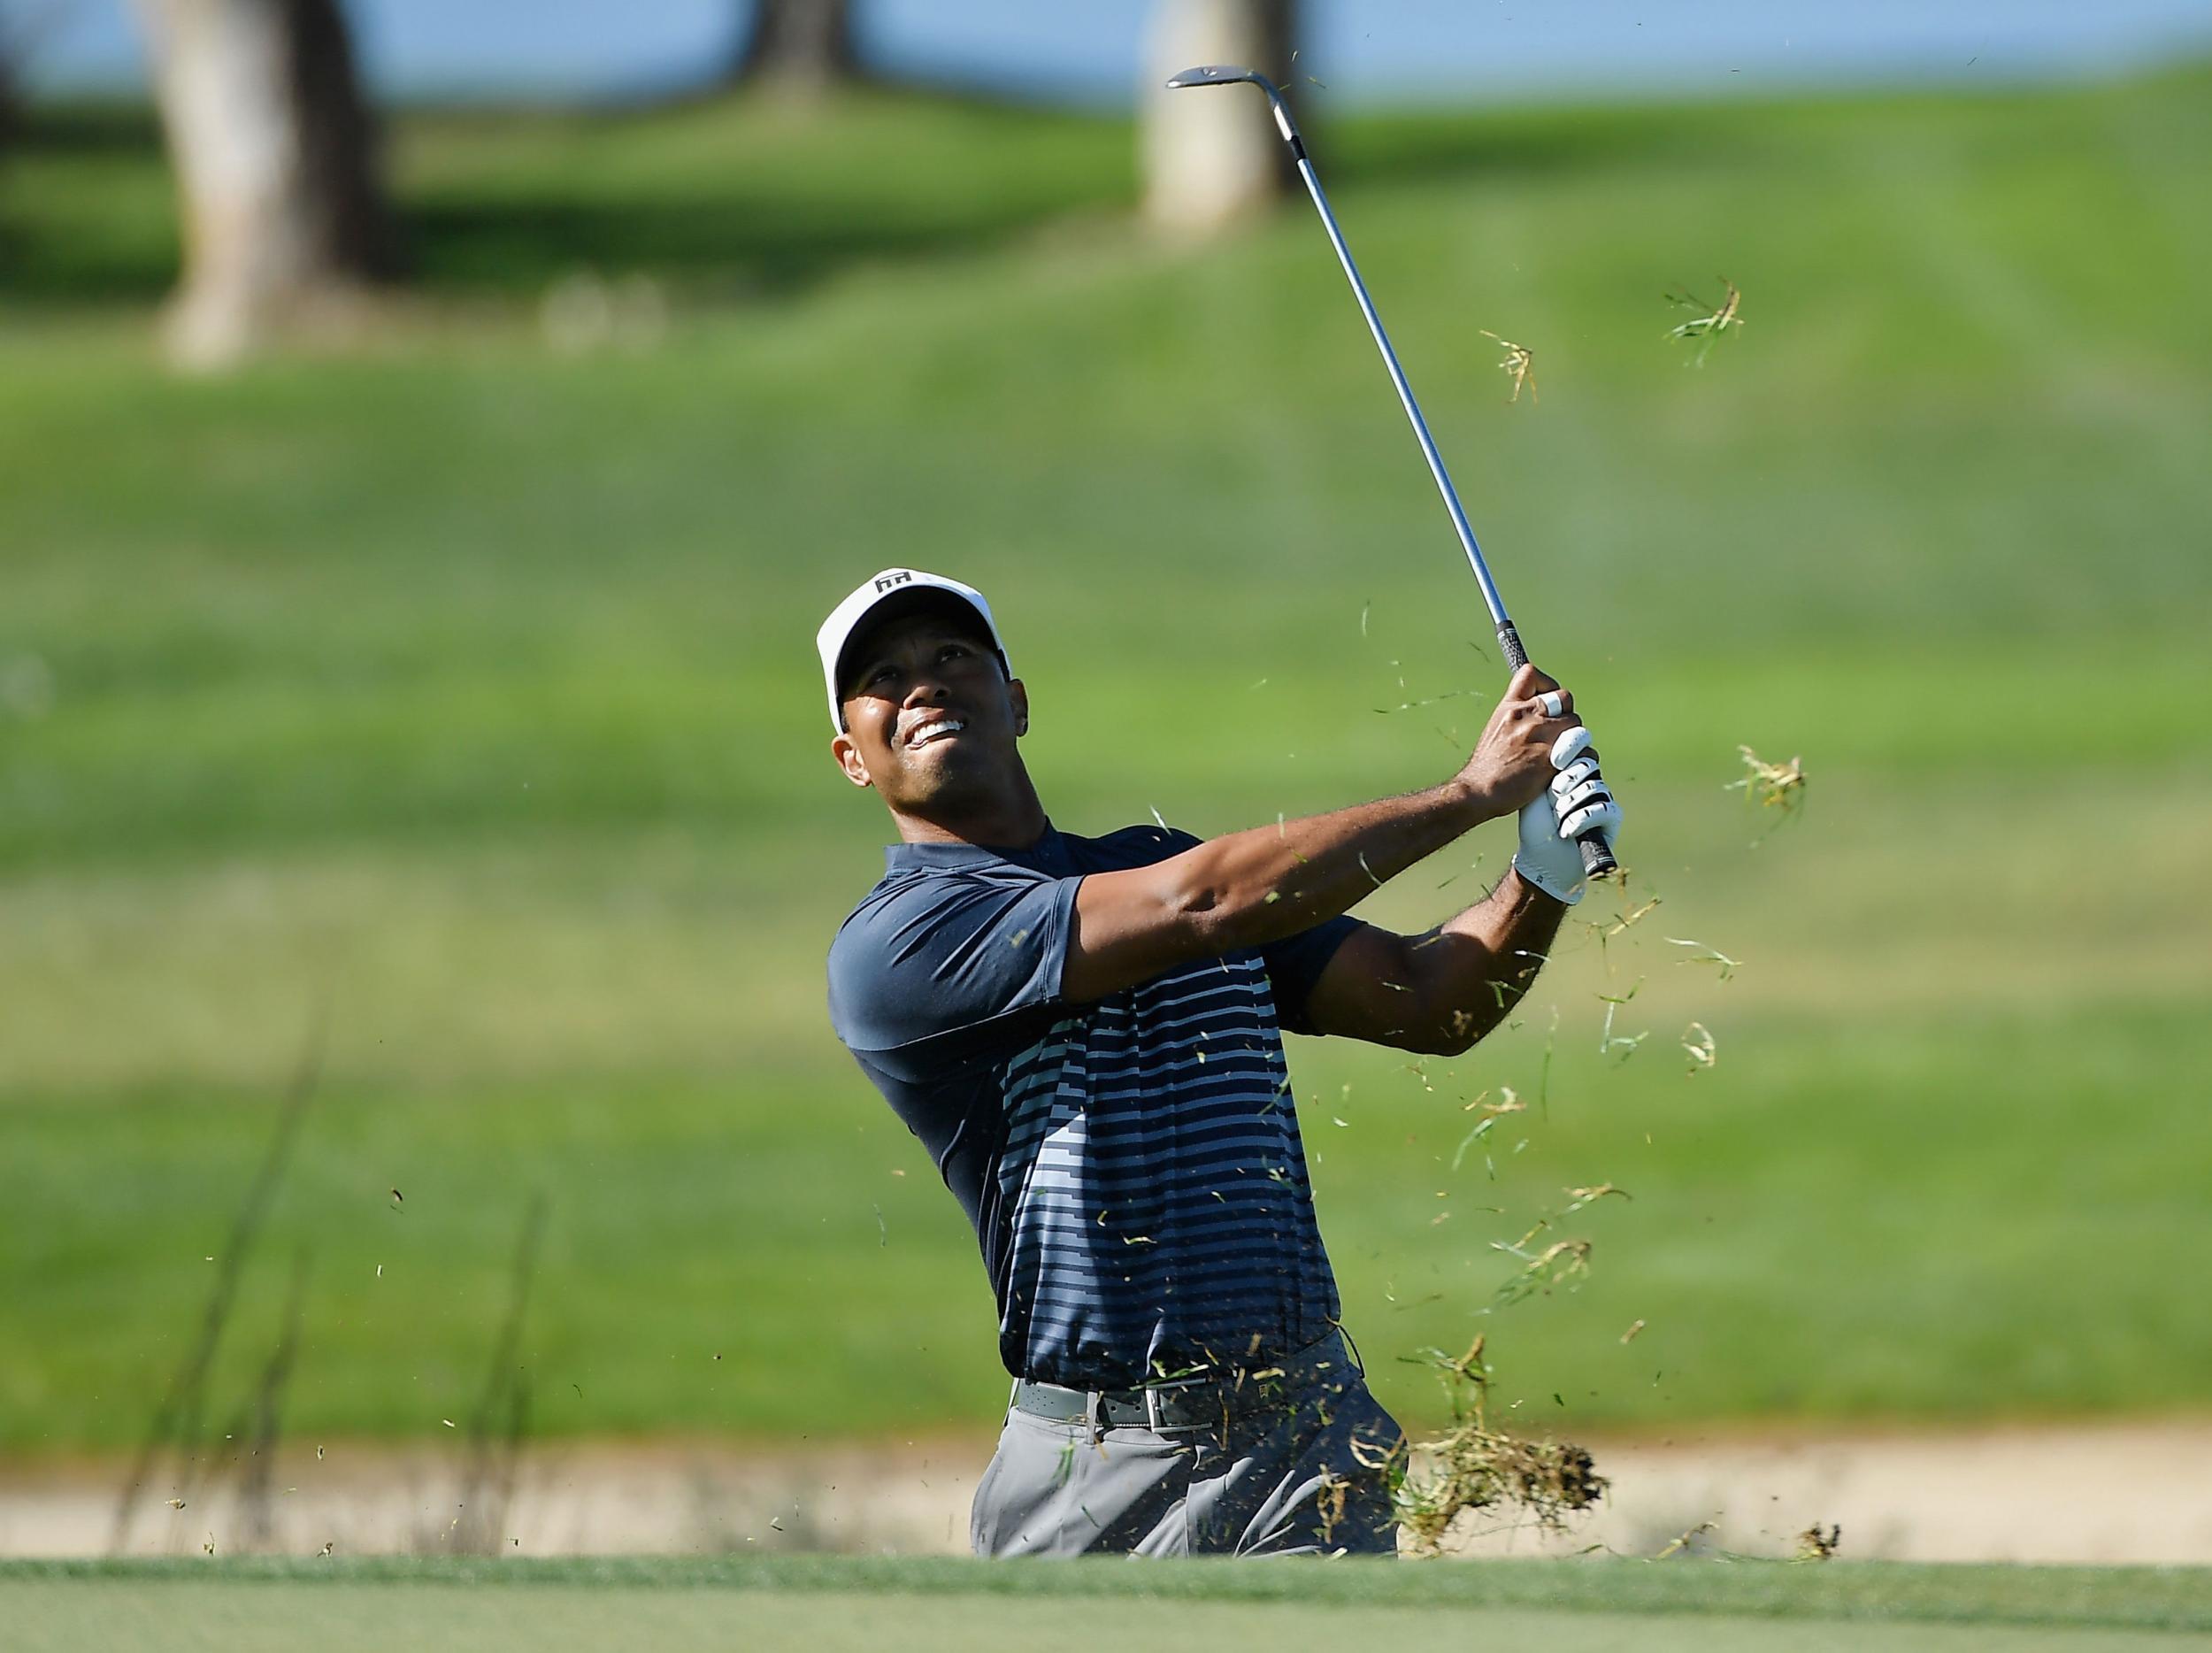 Tiger Woods makes cut at Torrey Pines with last-hole birdie | The Independent2500 x 1868